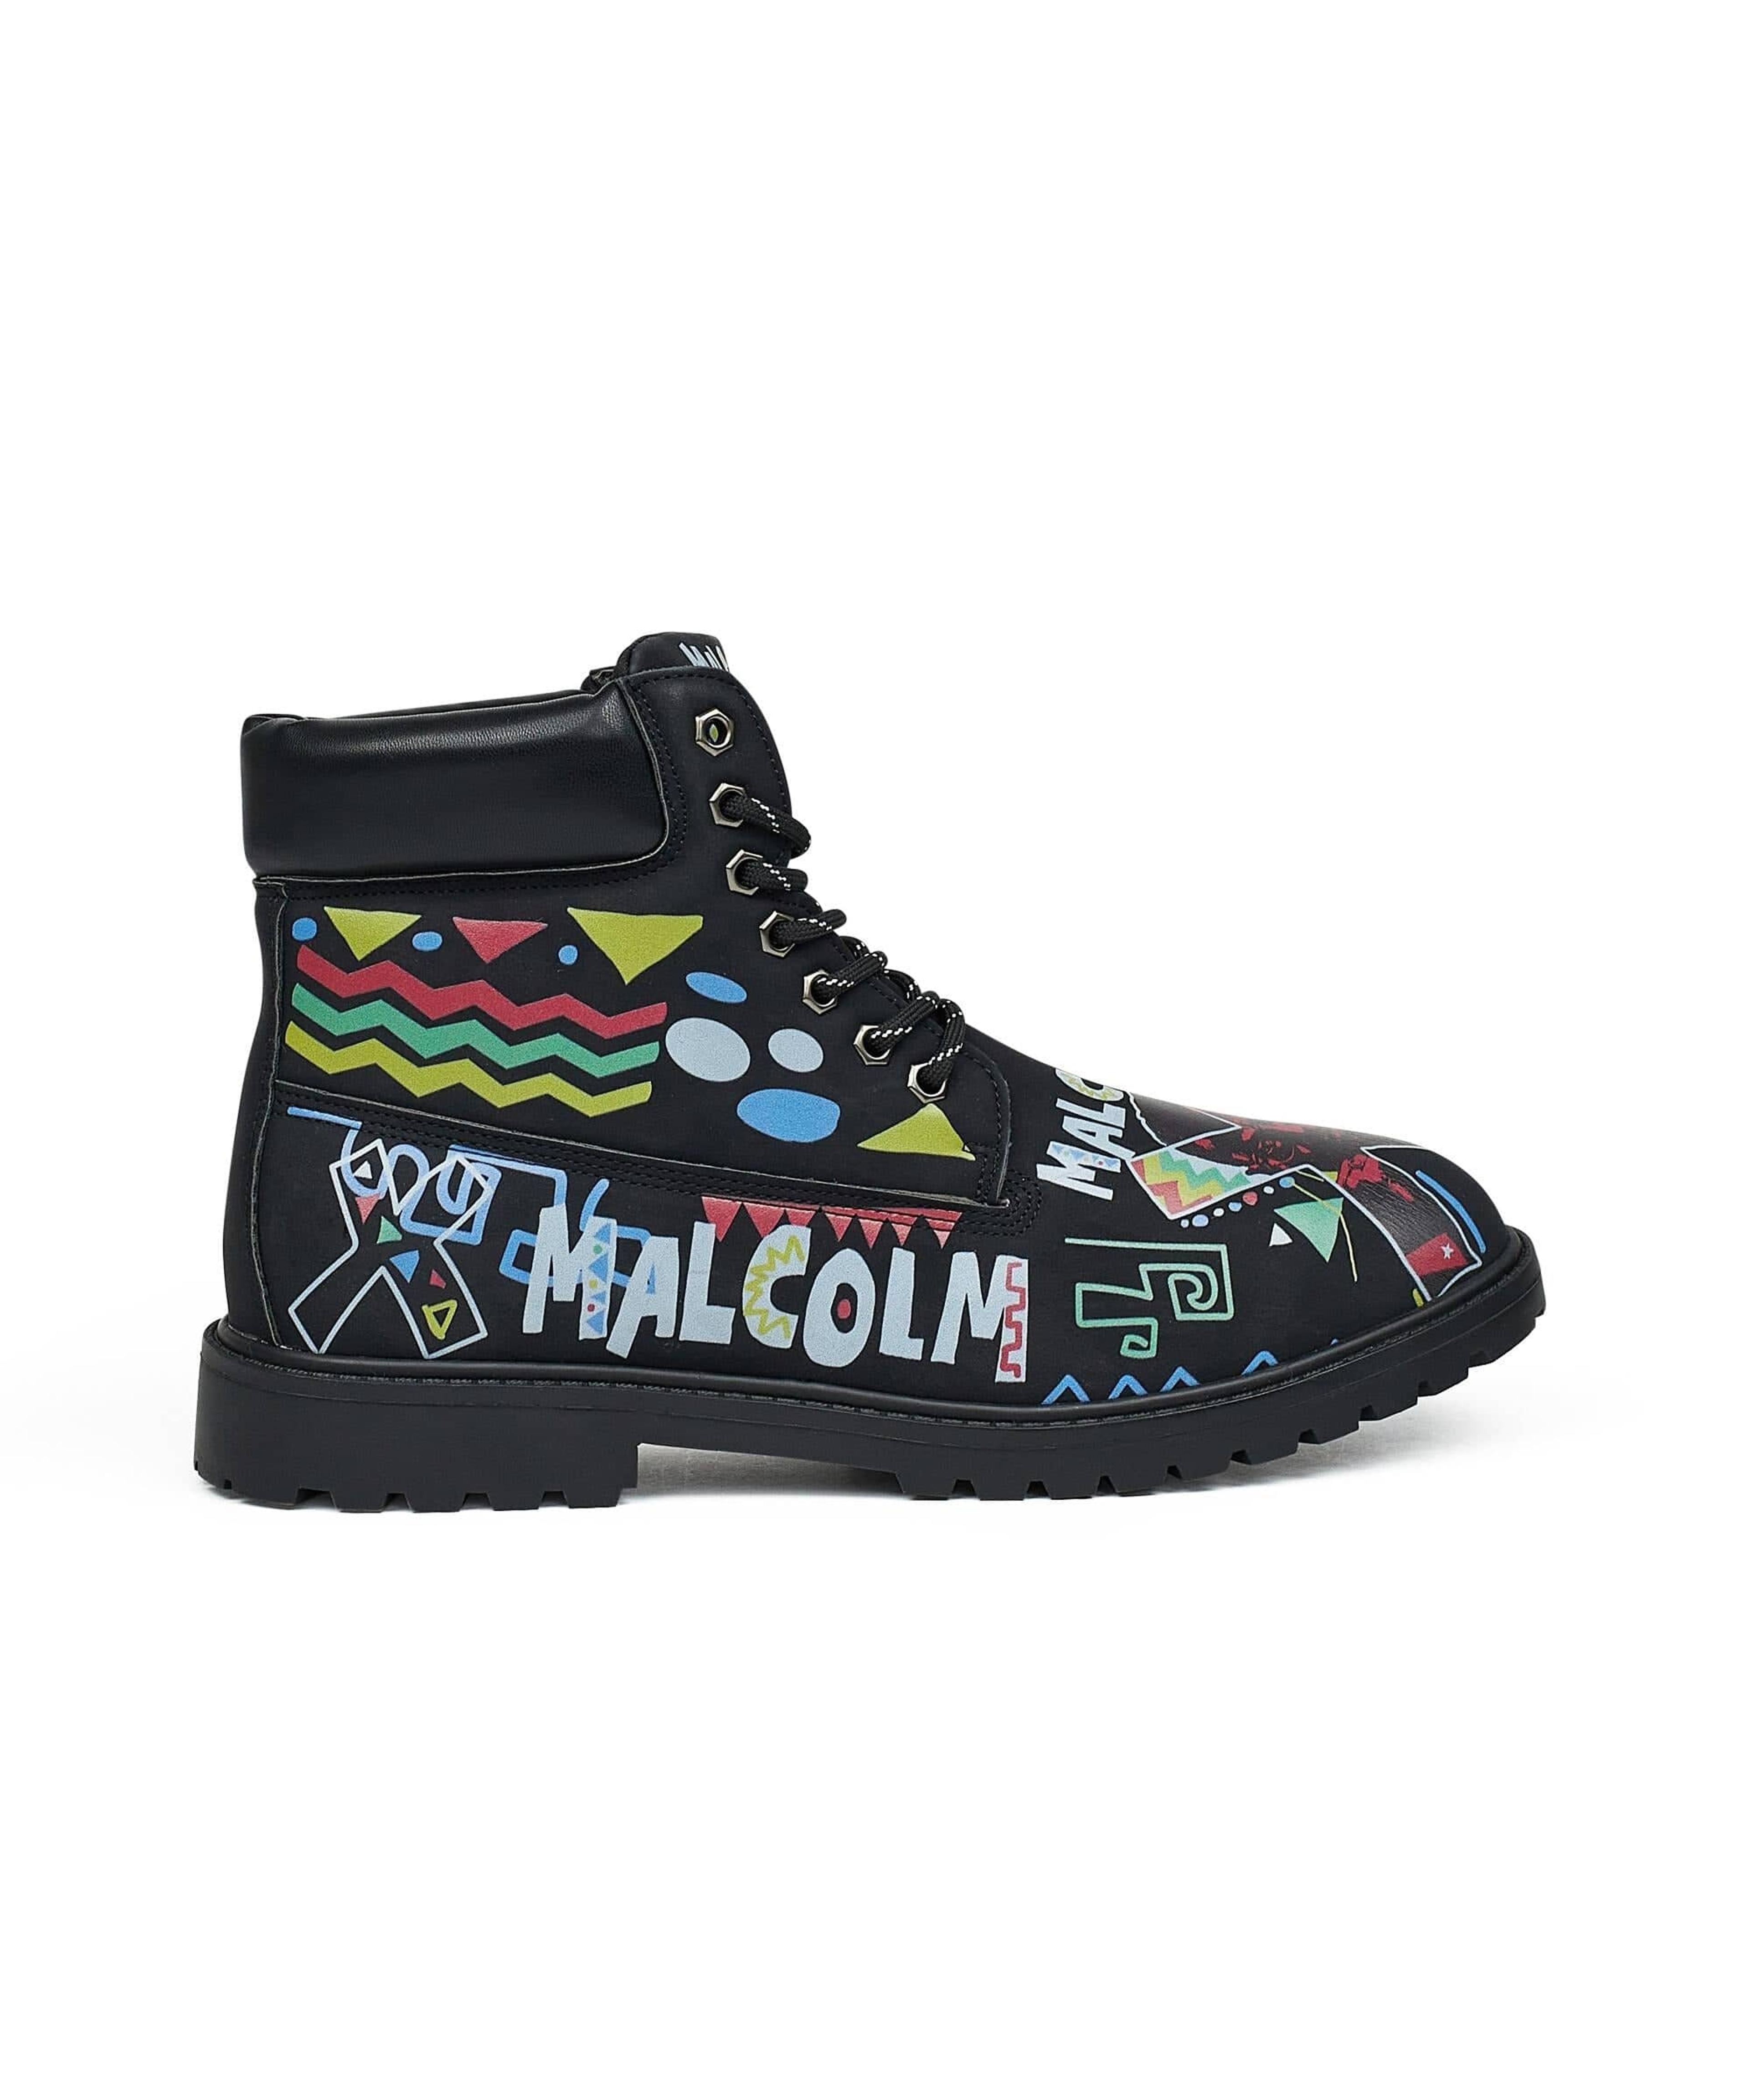 Alternate View 1 of Malcolm X Reason Collab Faux Suede Graphic Print Boots - Black